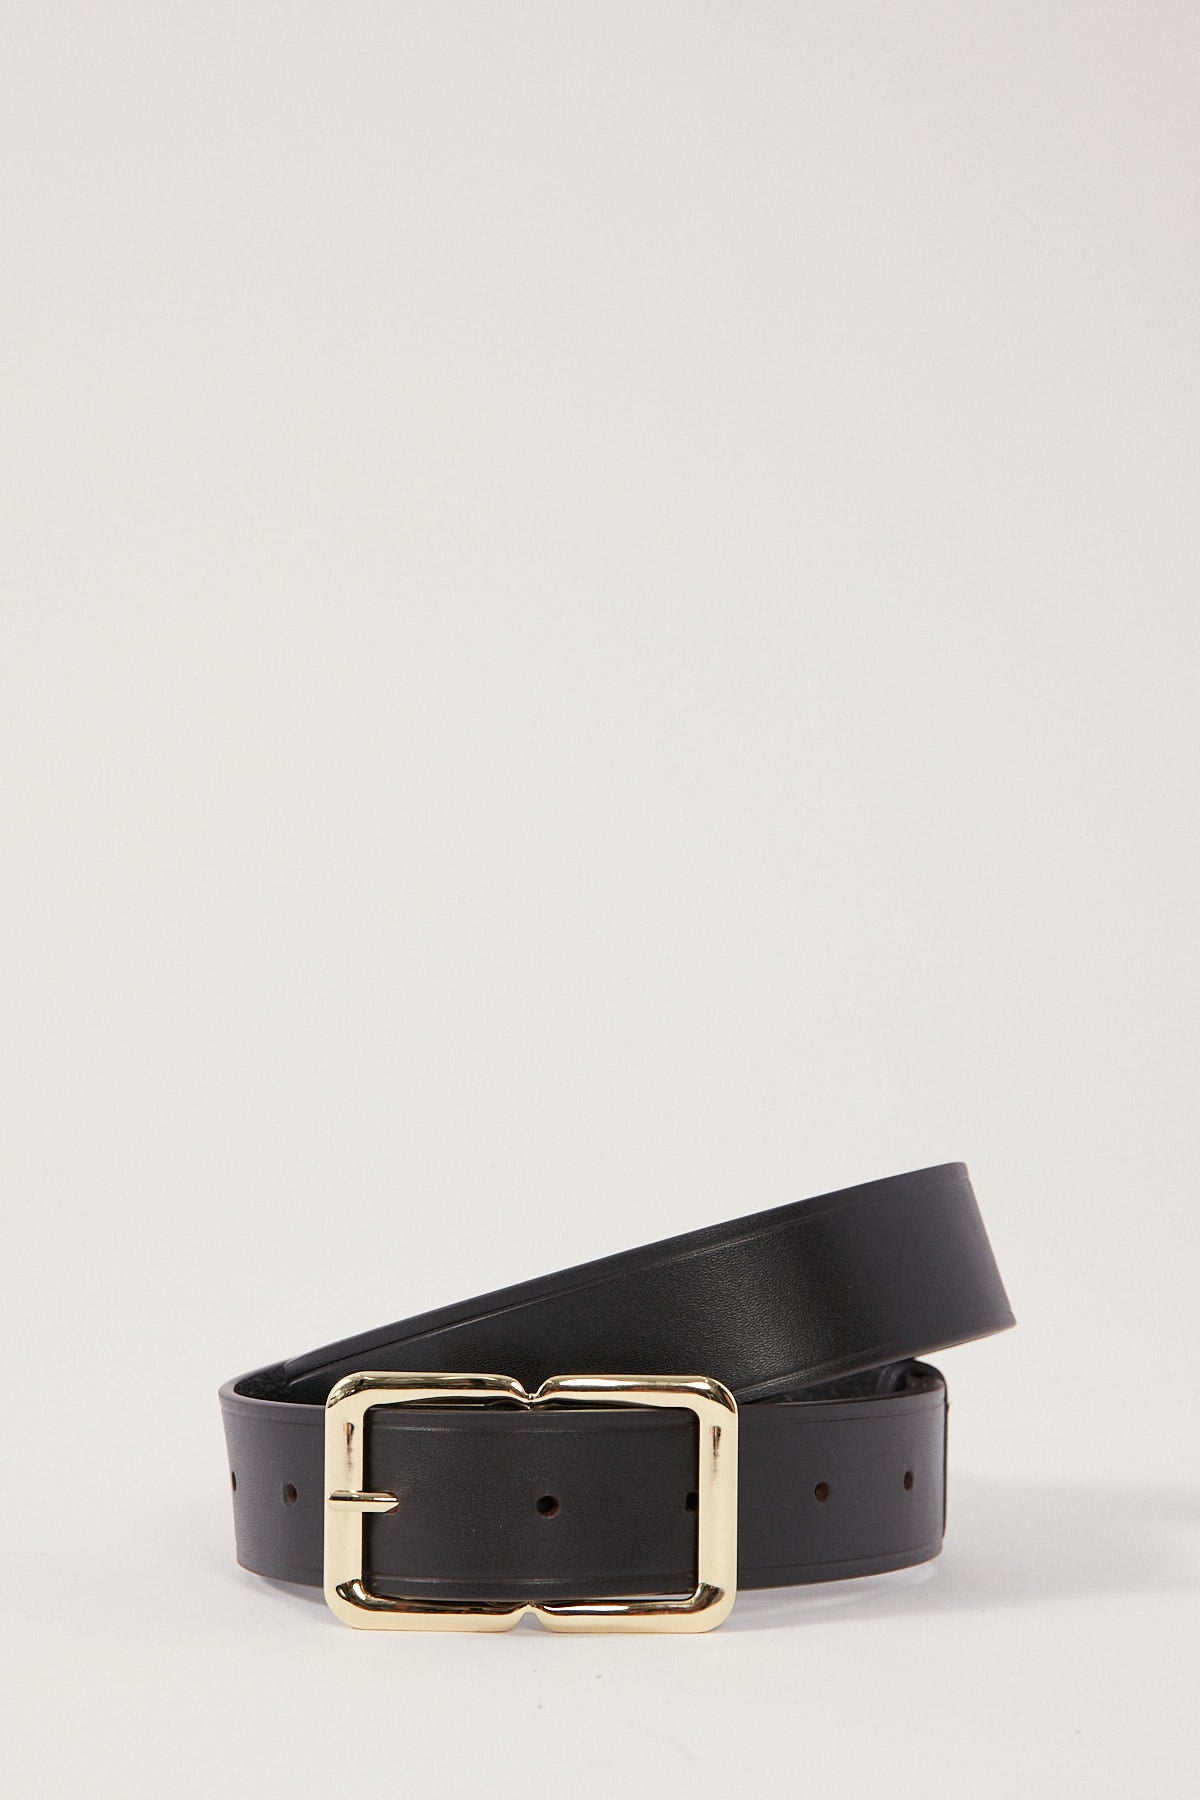 Nakedvice The Miles Belt Brown/Gold